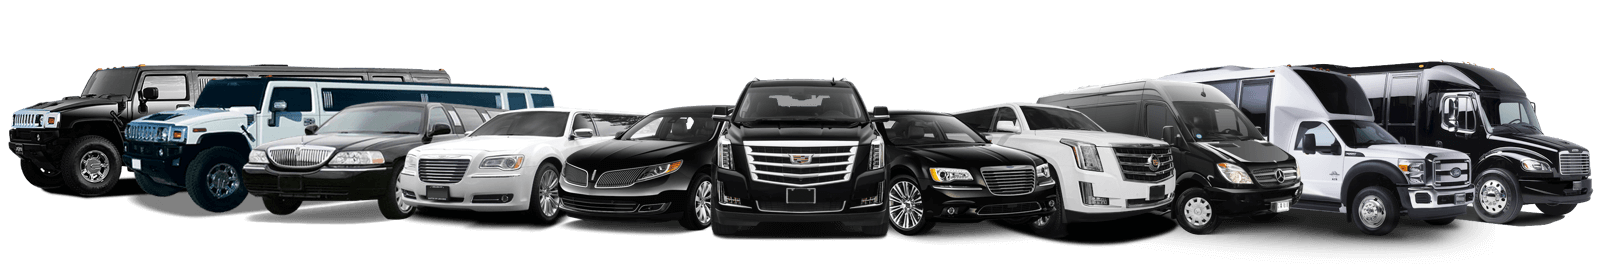 limo rental services in los angeles